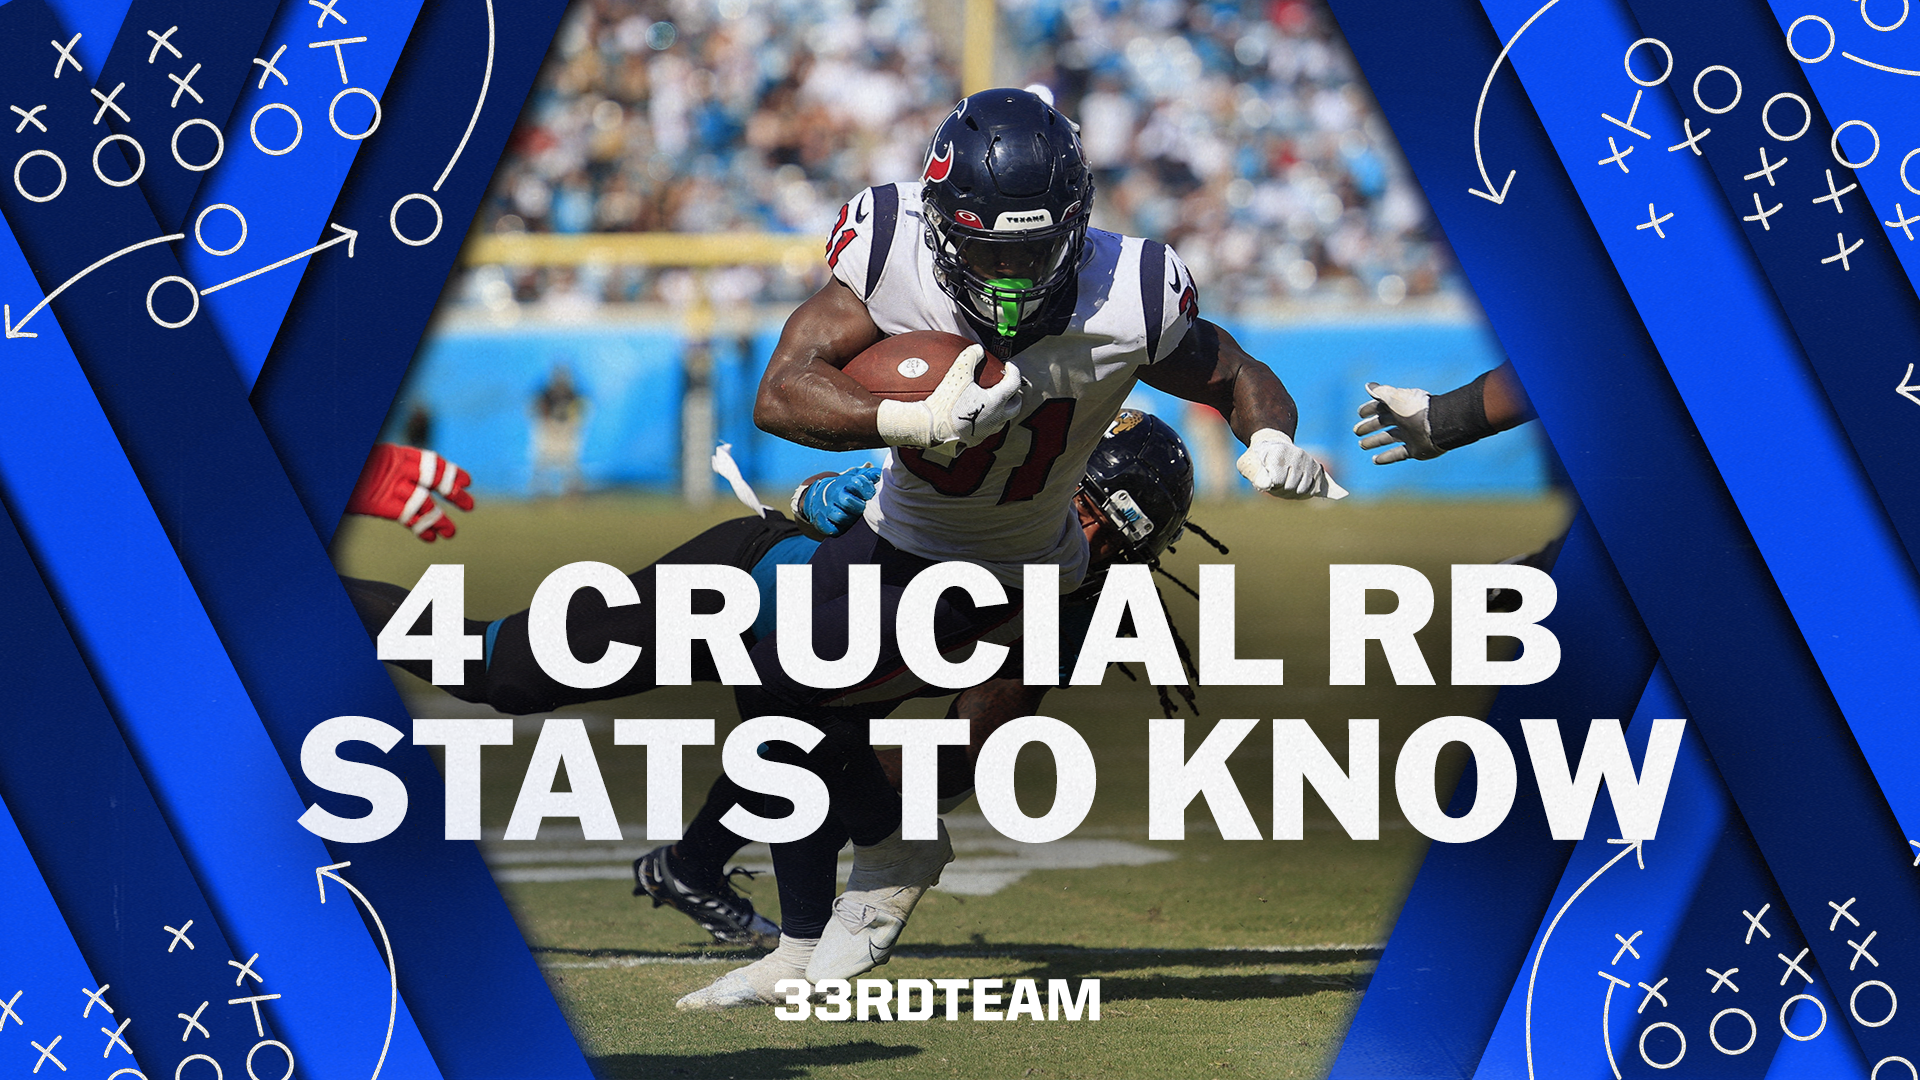 4 Crucial RB Stats to Know